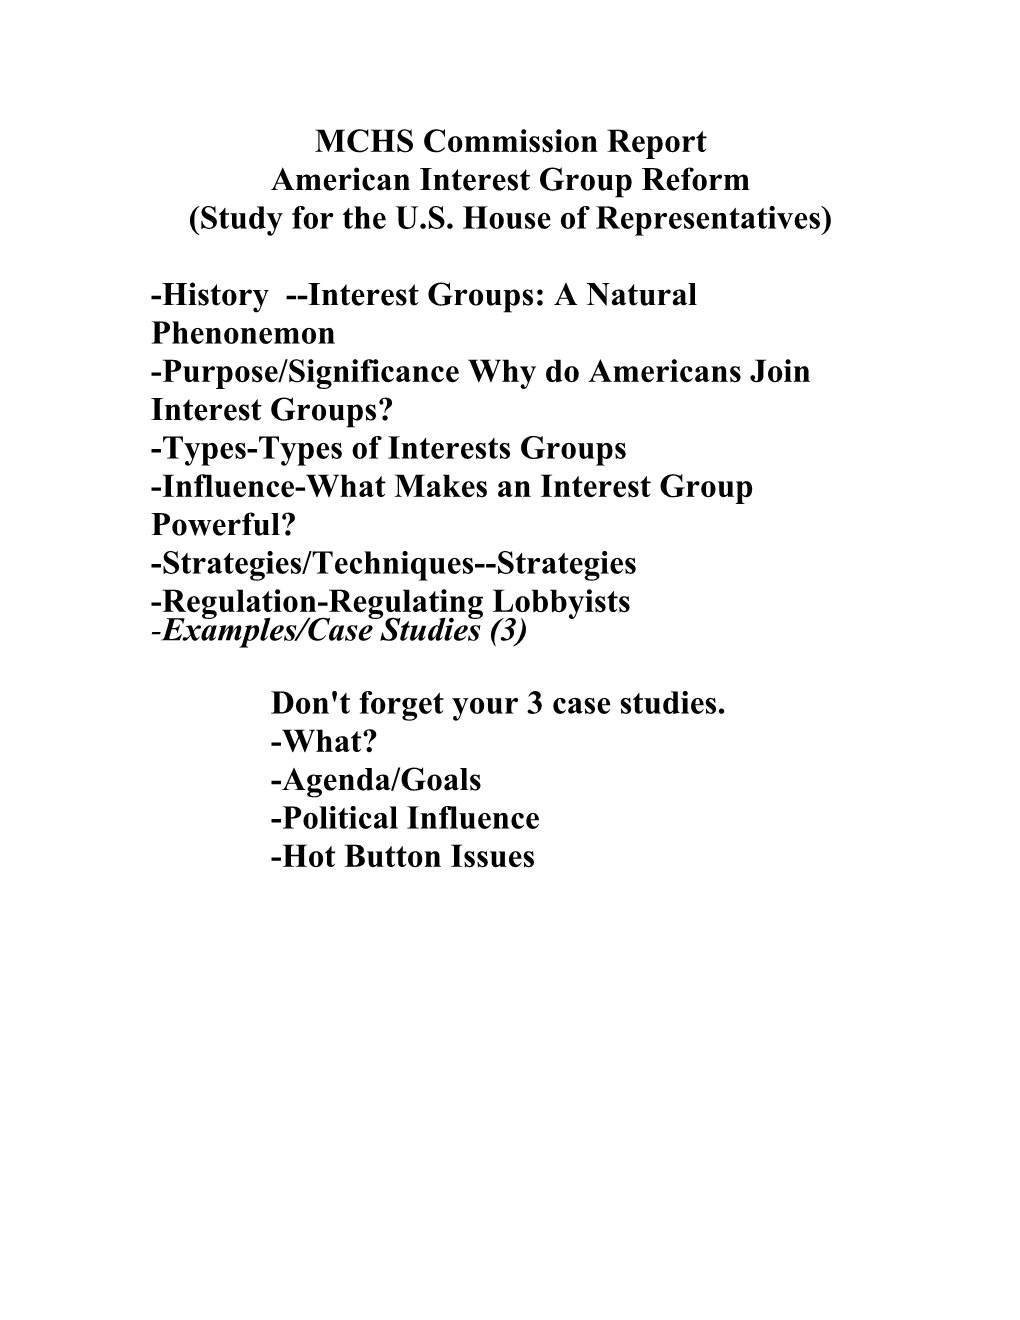 Interest Groups,MCHS Commission Report : American Interest Group Reform